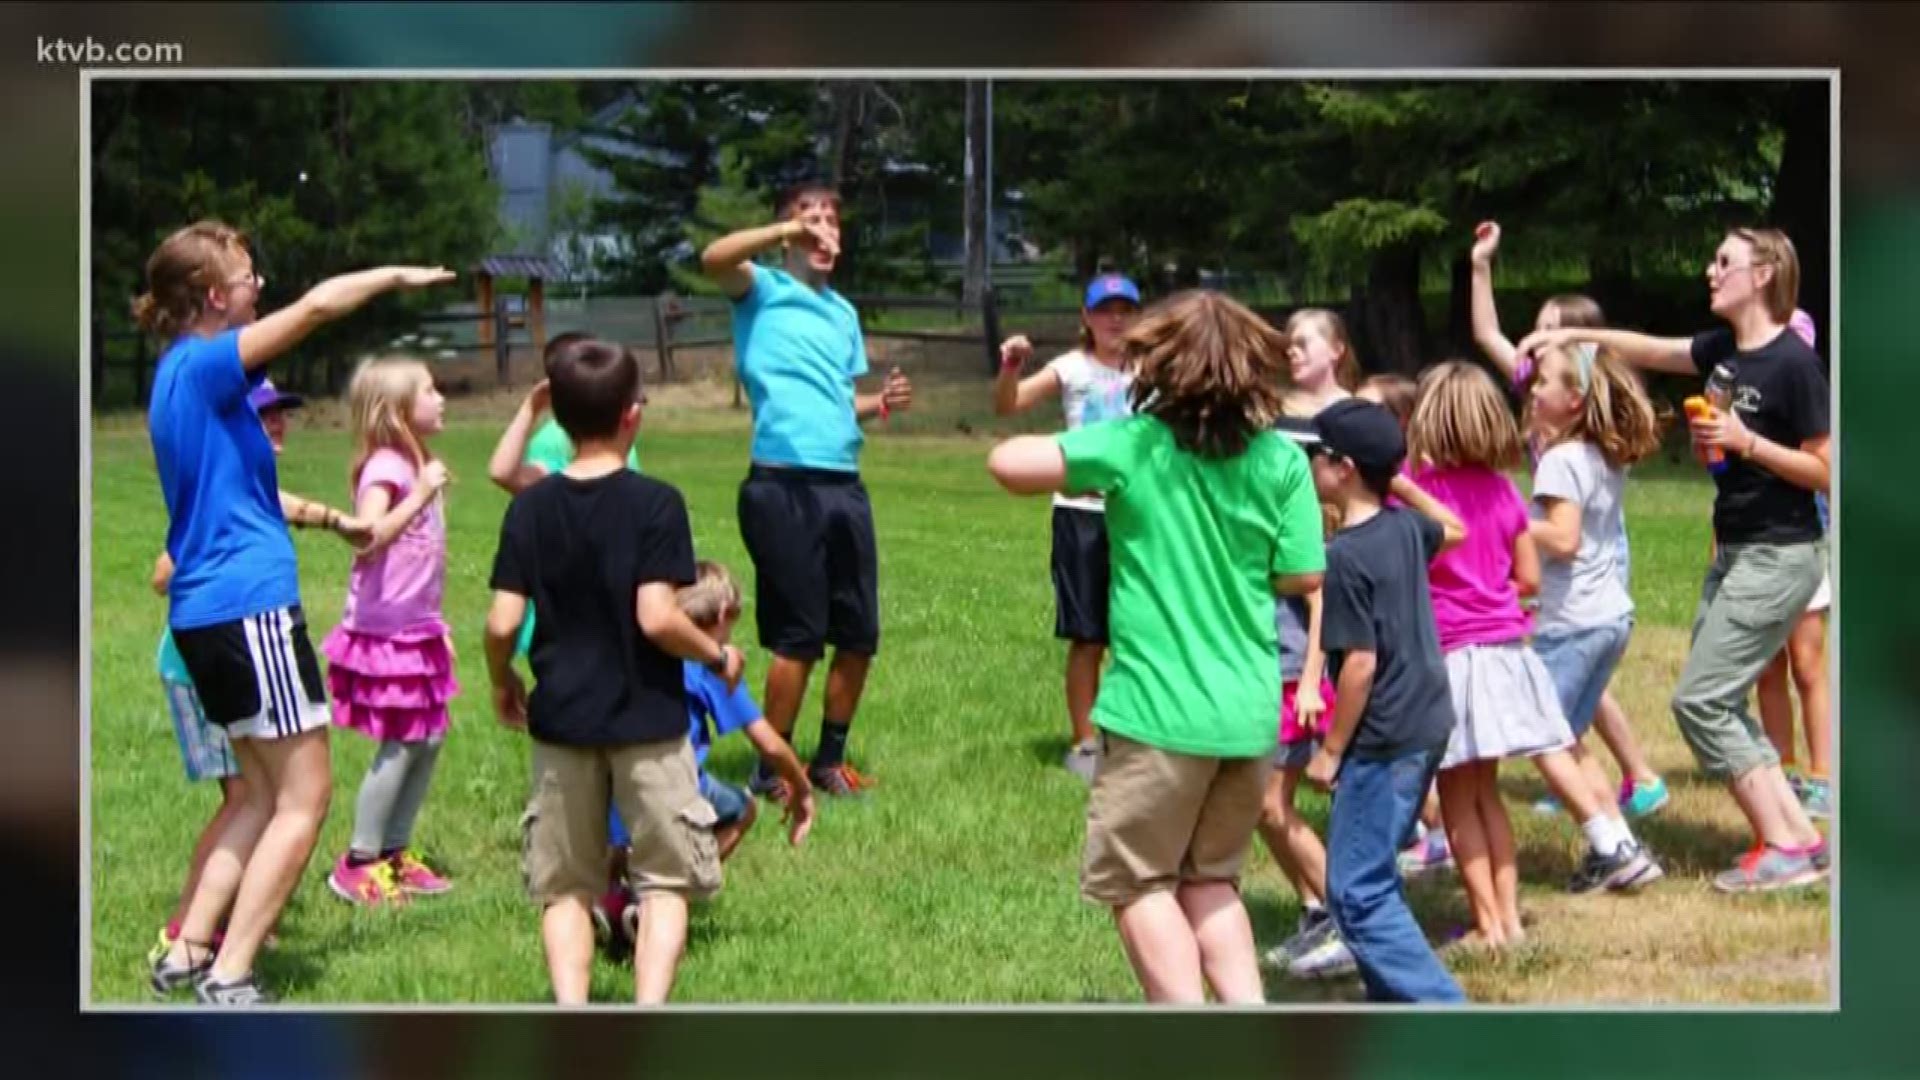 Donations from the community, including many KTVB viewers, will make it possible for dozens of children in foster care to attend camp this summer.